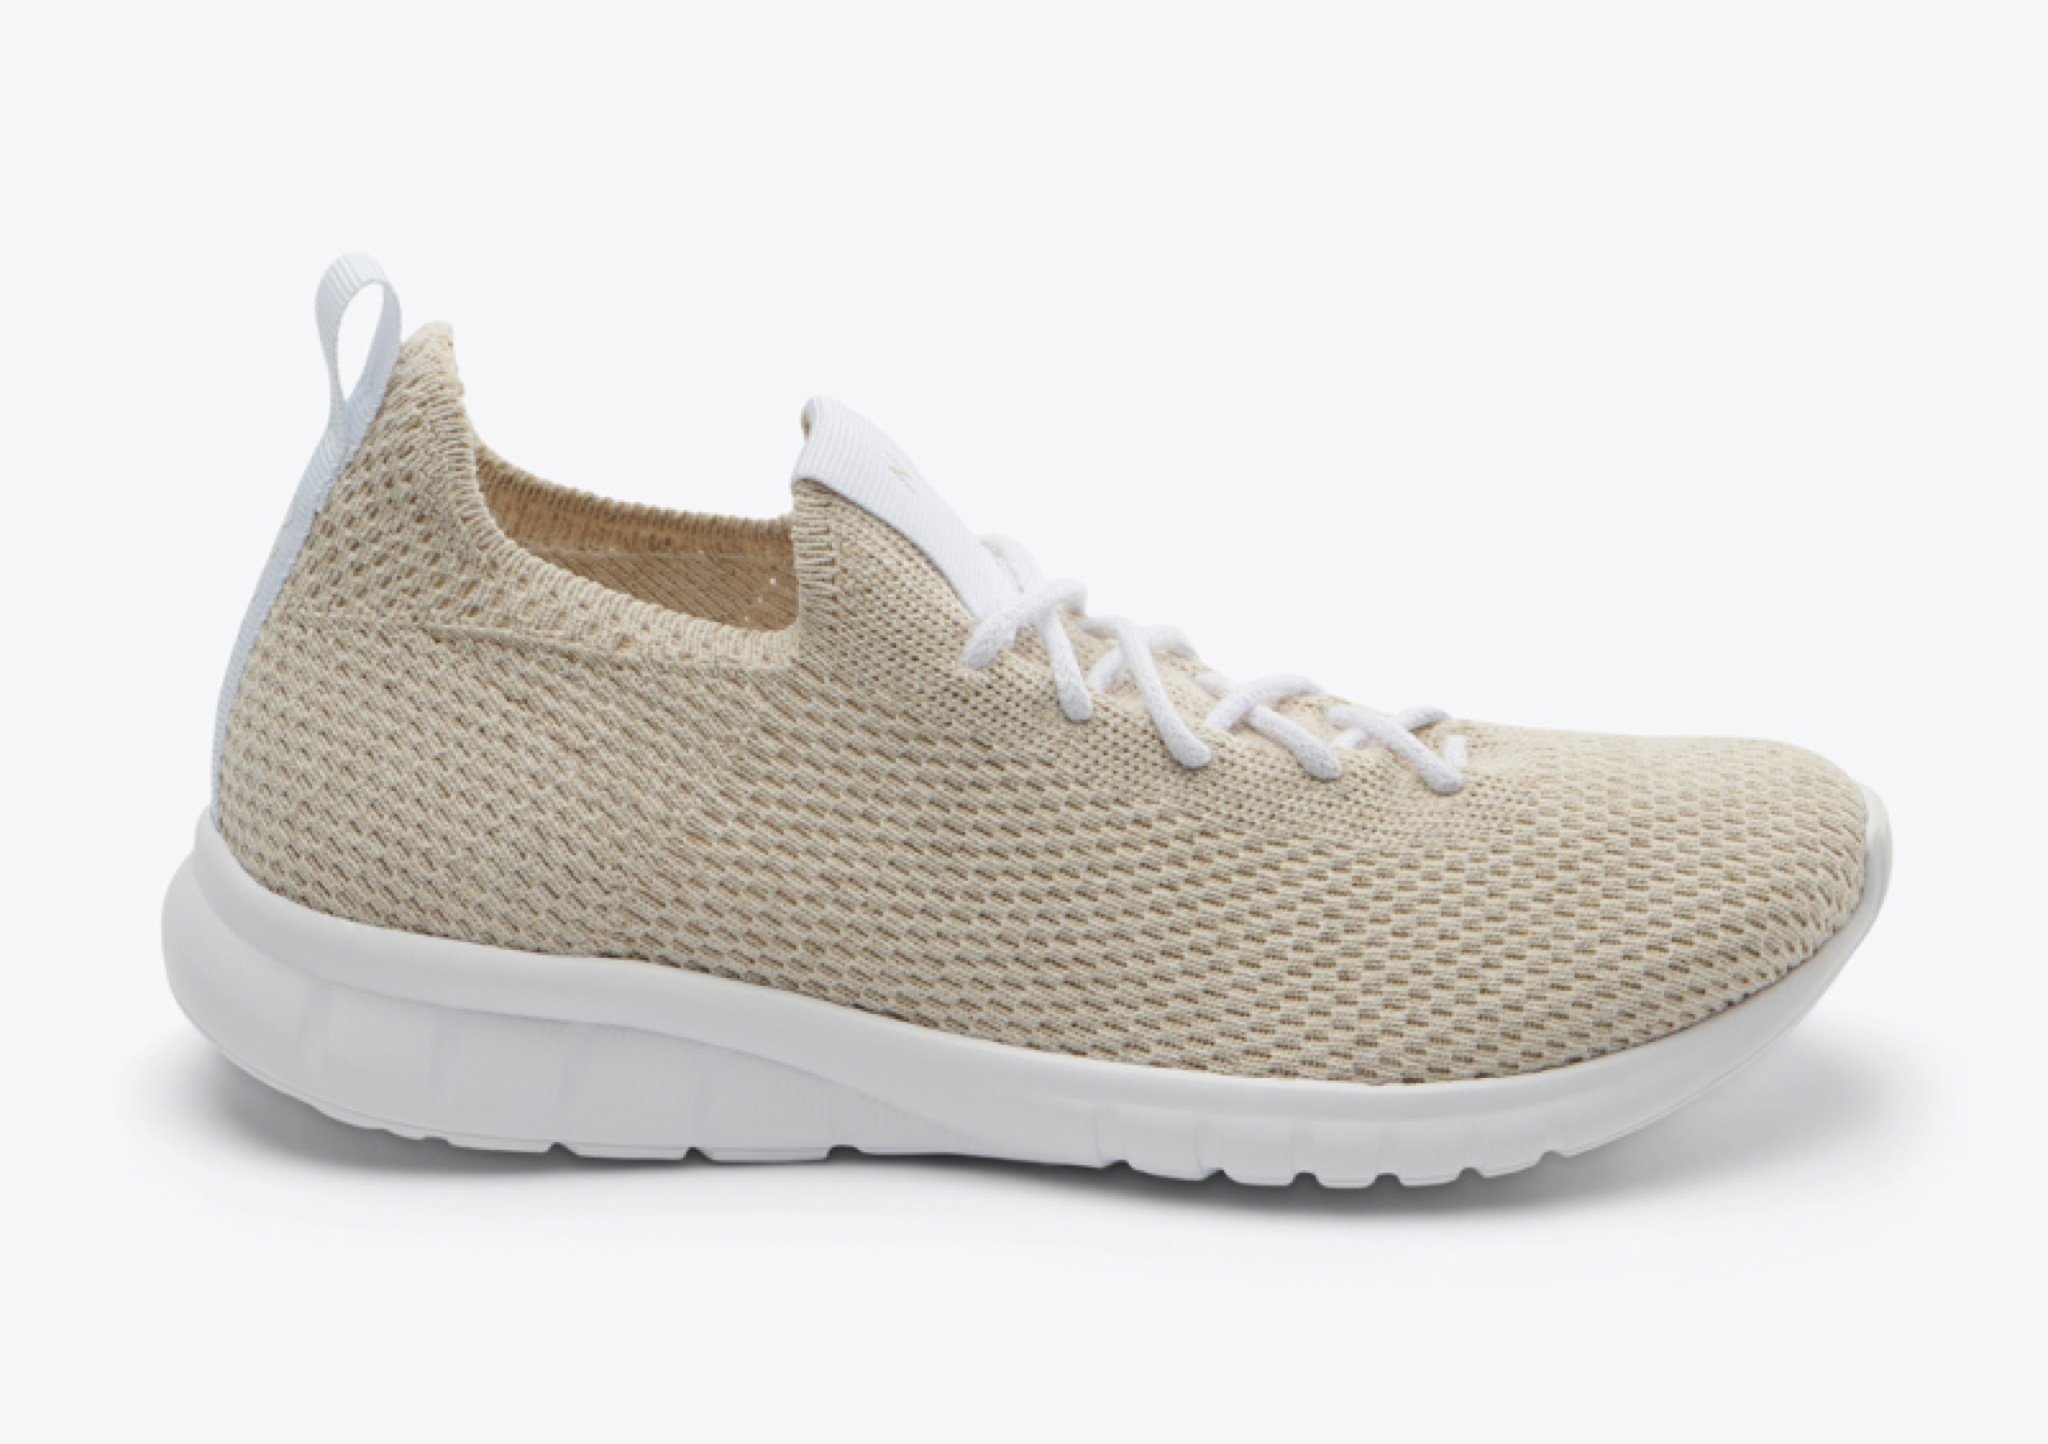 Nisolo Women's Athleisure Eco-Knit Sneaker Linen - Every Nisolo product is built on the foundation of comfort, function, and design. 